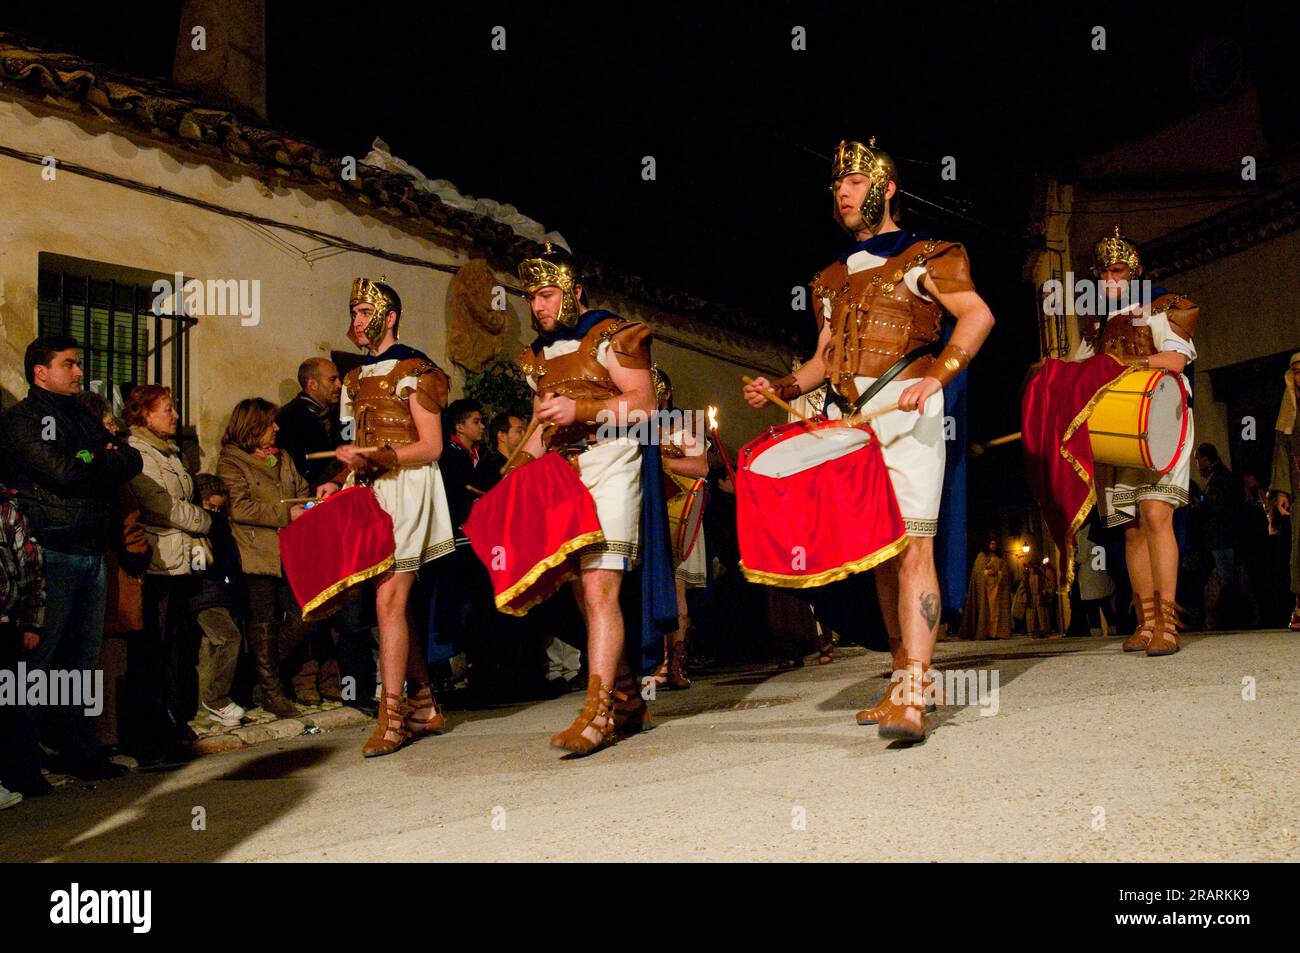 Performance. Passion of Chinchon. Chinchon, Madrid province, Spain. Stock Photo